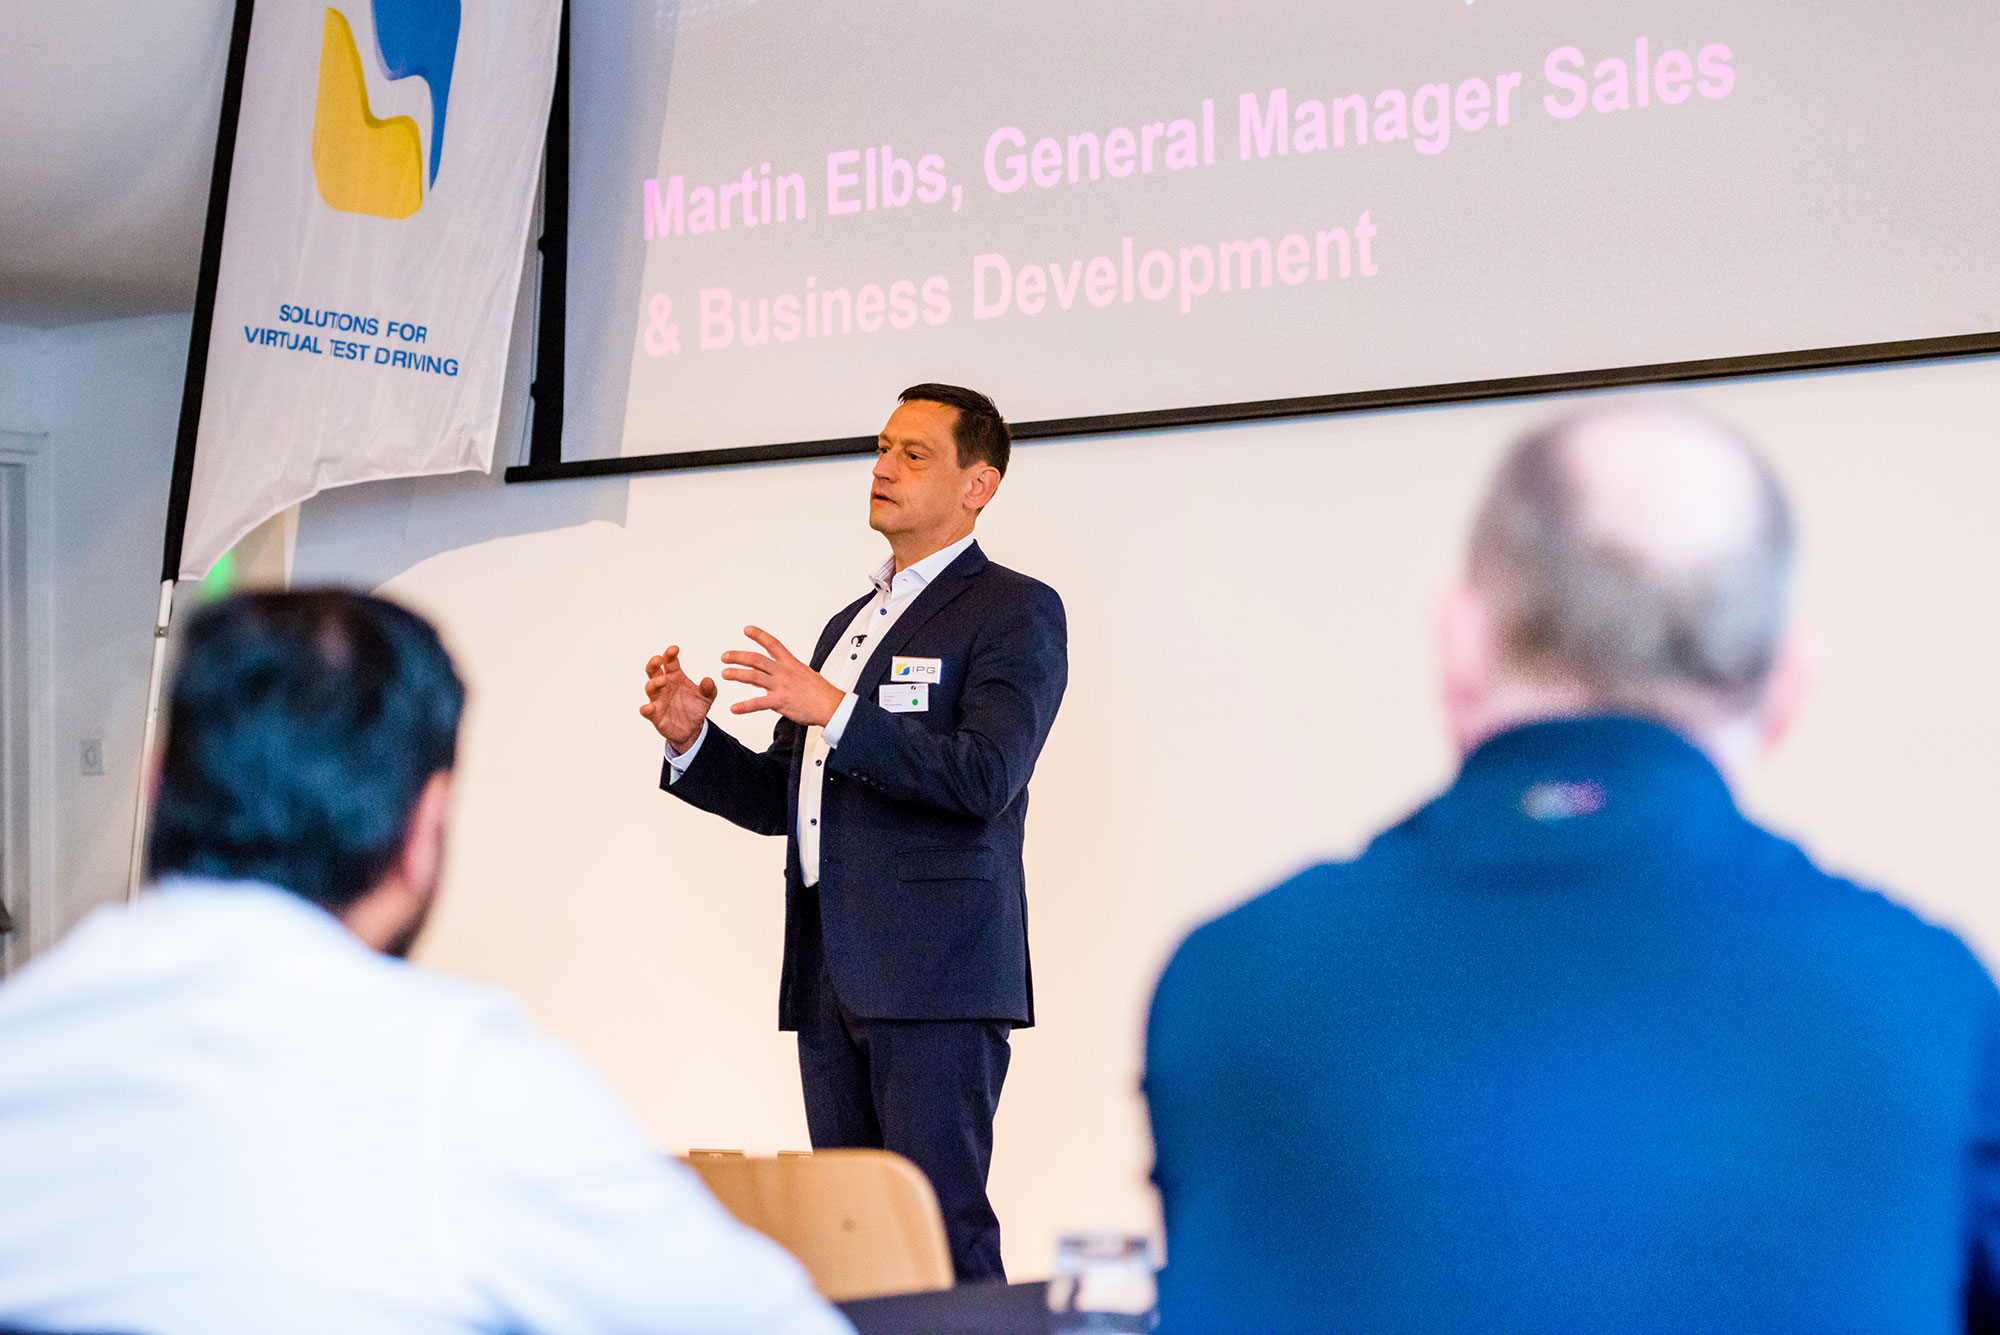 Martin Elbs, General Manager Sales & Business Development at IPG Automotive GmbH, stressed the importance of virtual vehicle development in his presentation. 